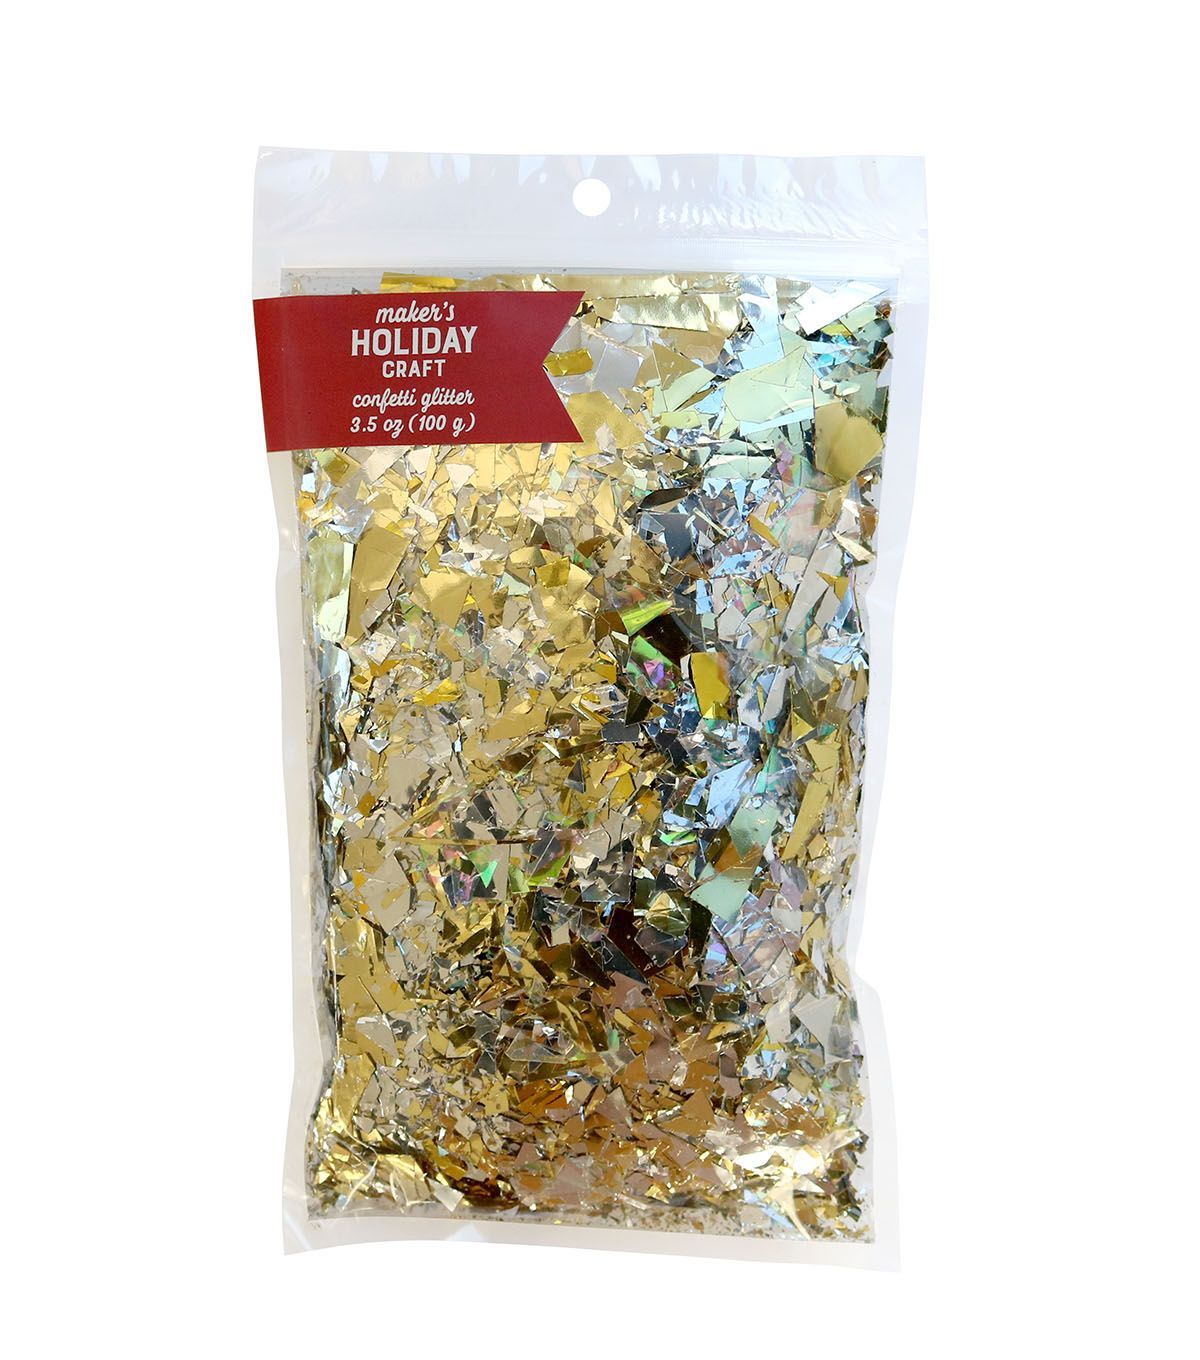 Maker's Holiday Craft 3.5oz Confetti Glitter - Gold -   24 holiday crafts products
 ideas